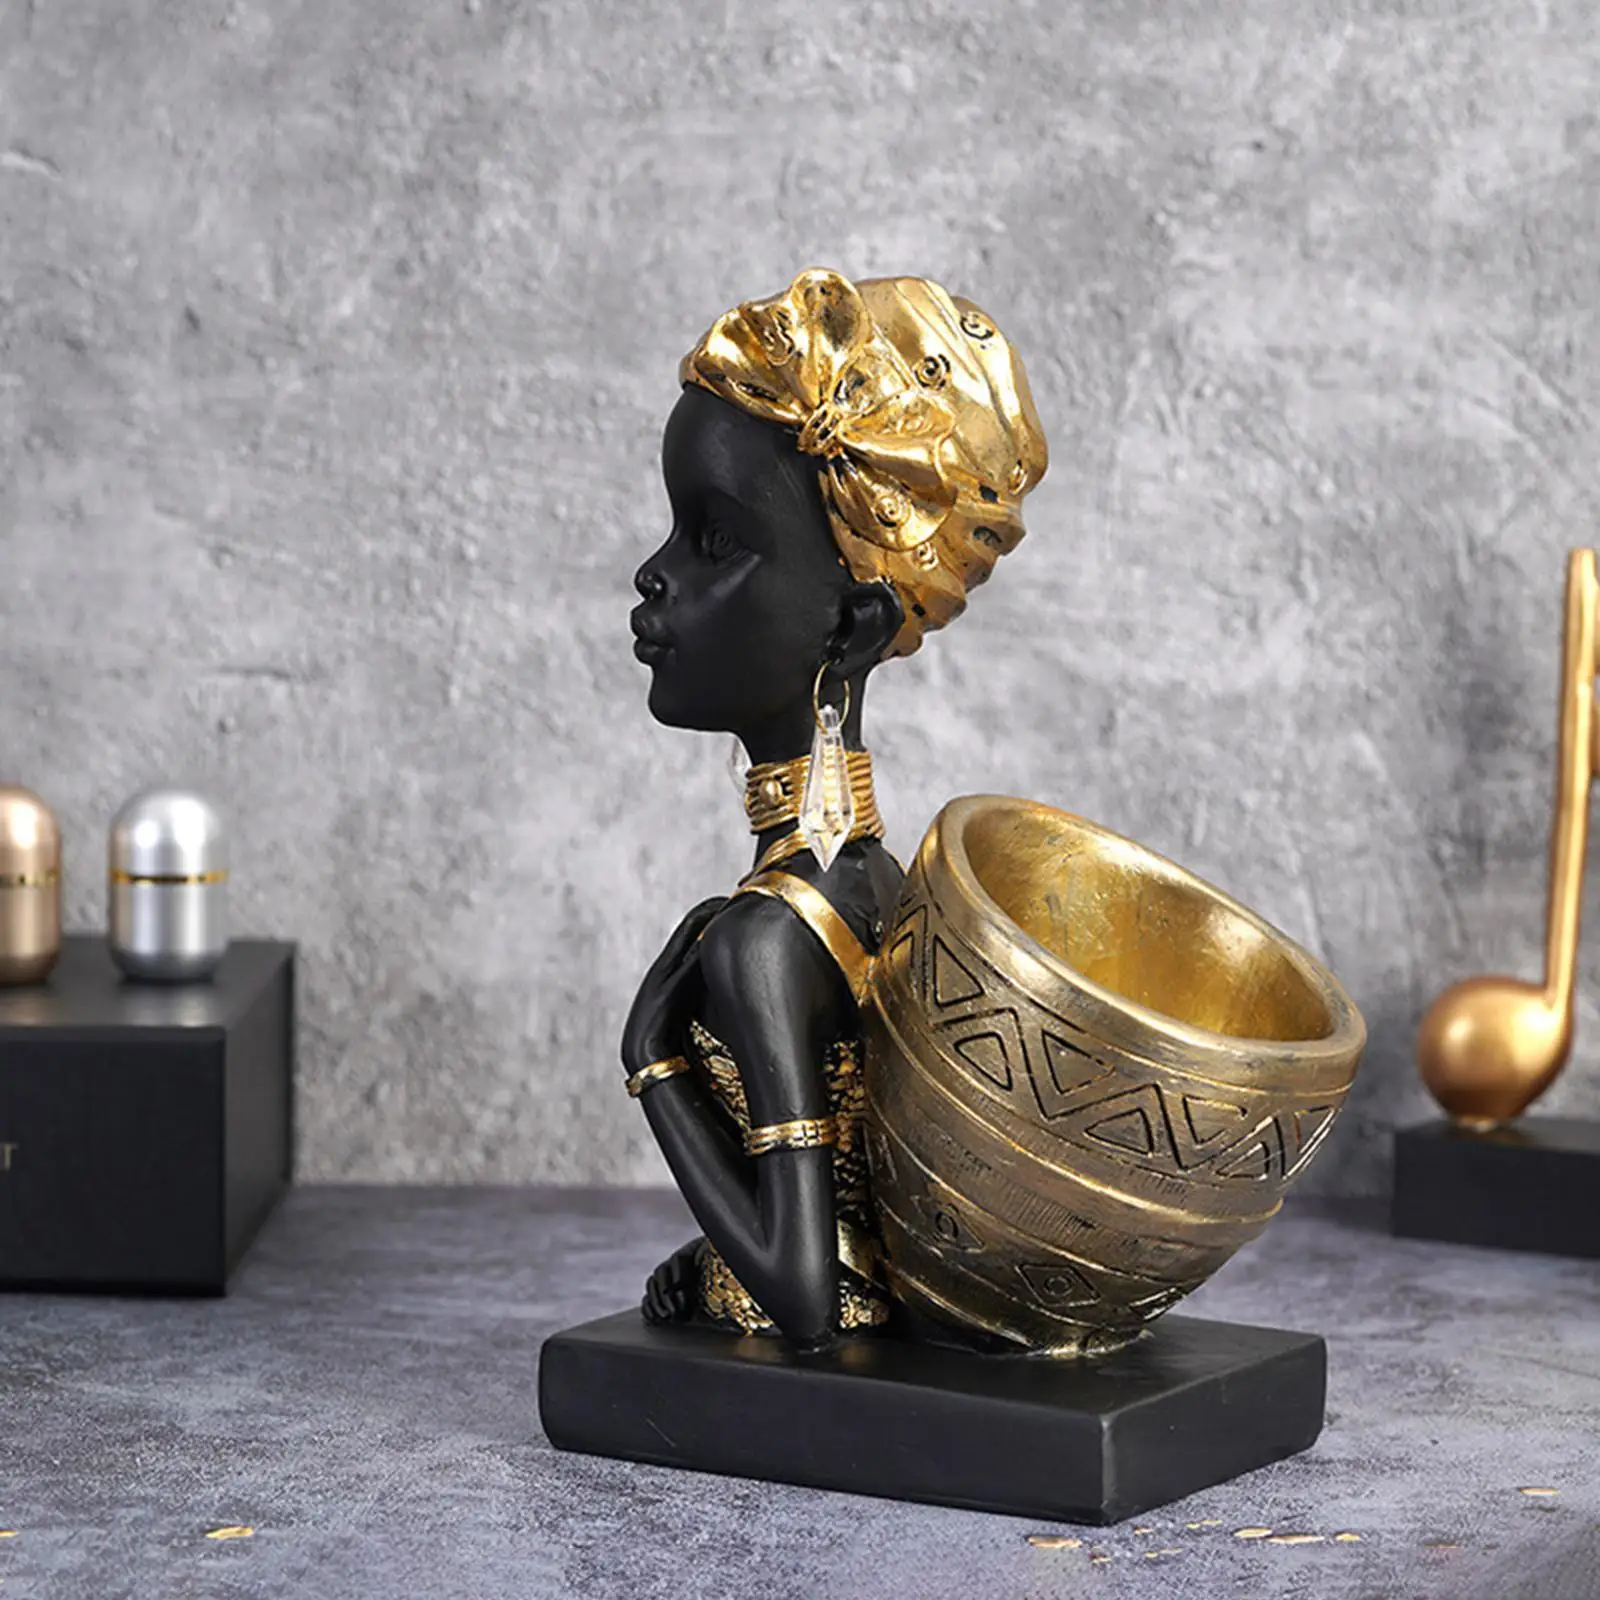 Tribal Lady Statue Sculpture African Table Centerpieces Resin Modern Decor Craft Ornament for Tabletop Office Bedroom Table Desk